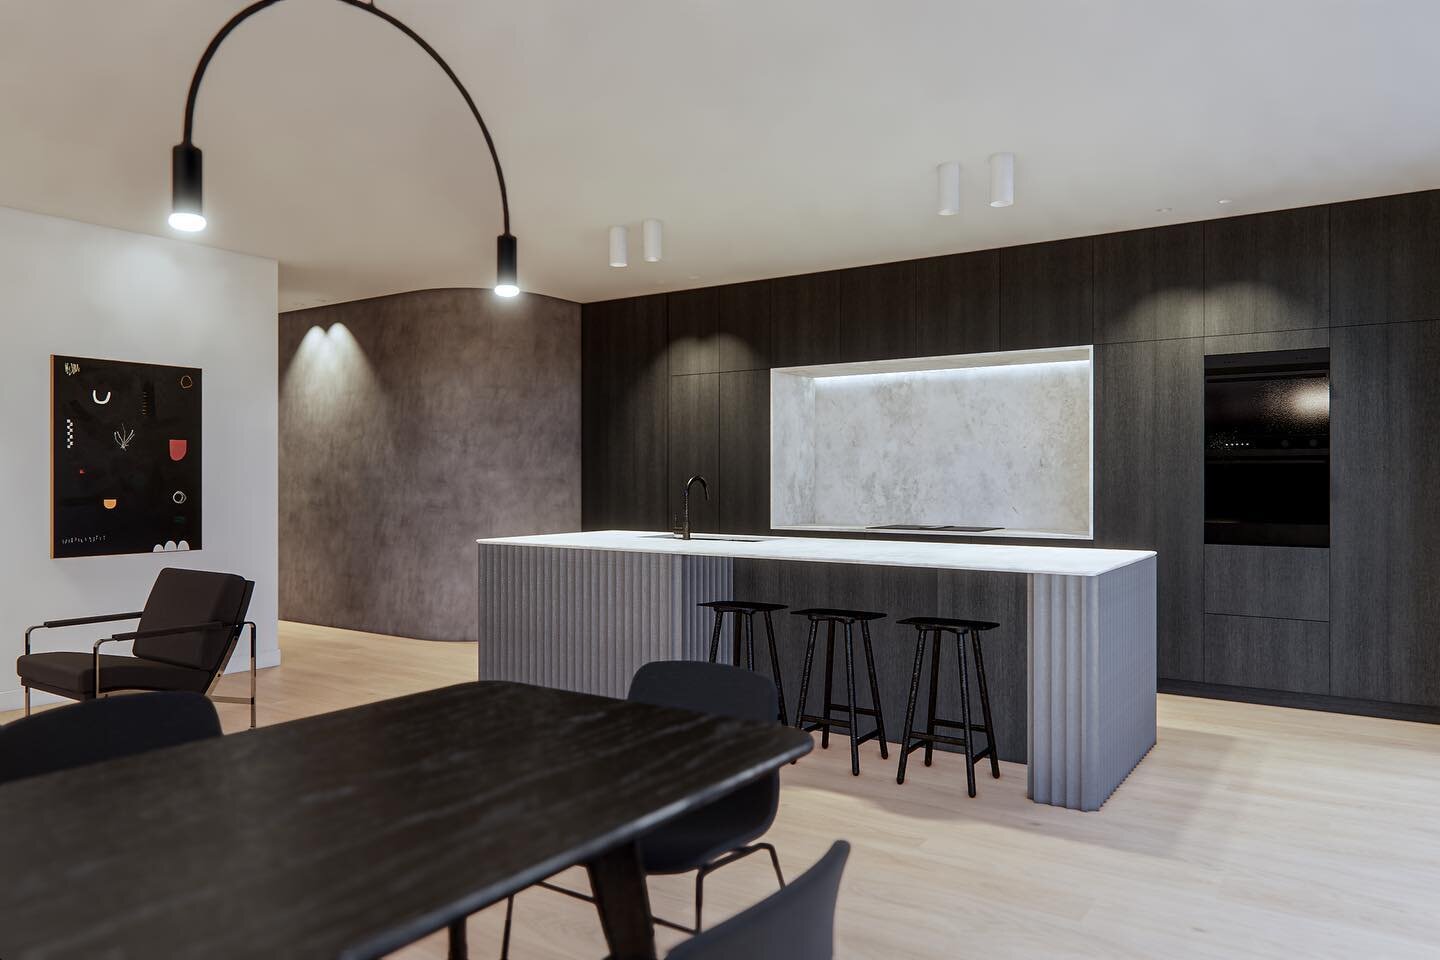 Stott House
Kitchen Render

Interior design is underway at our Stott House project in collaboration with @homes_by_artisan this render features artwork by @saxonjjquinn who currently has an exhibition on at @metro_gallery until the 13th of March, be 